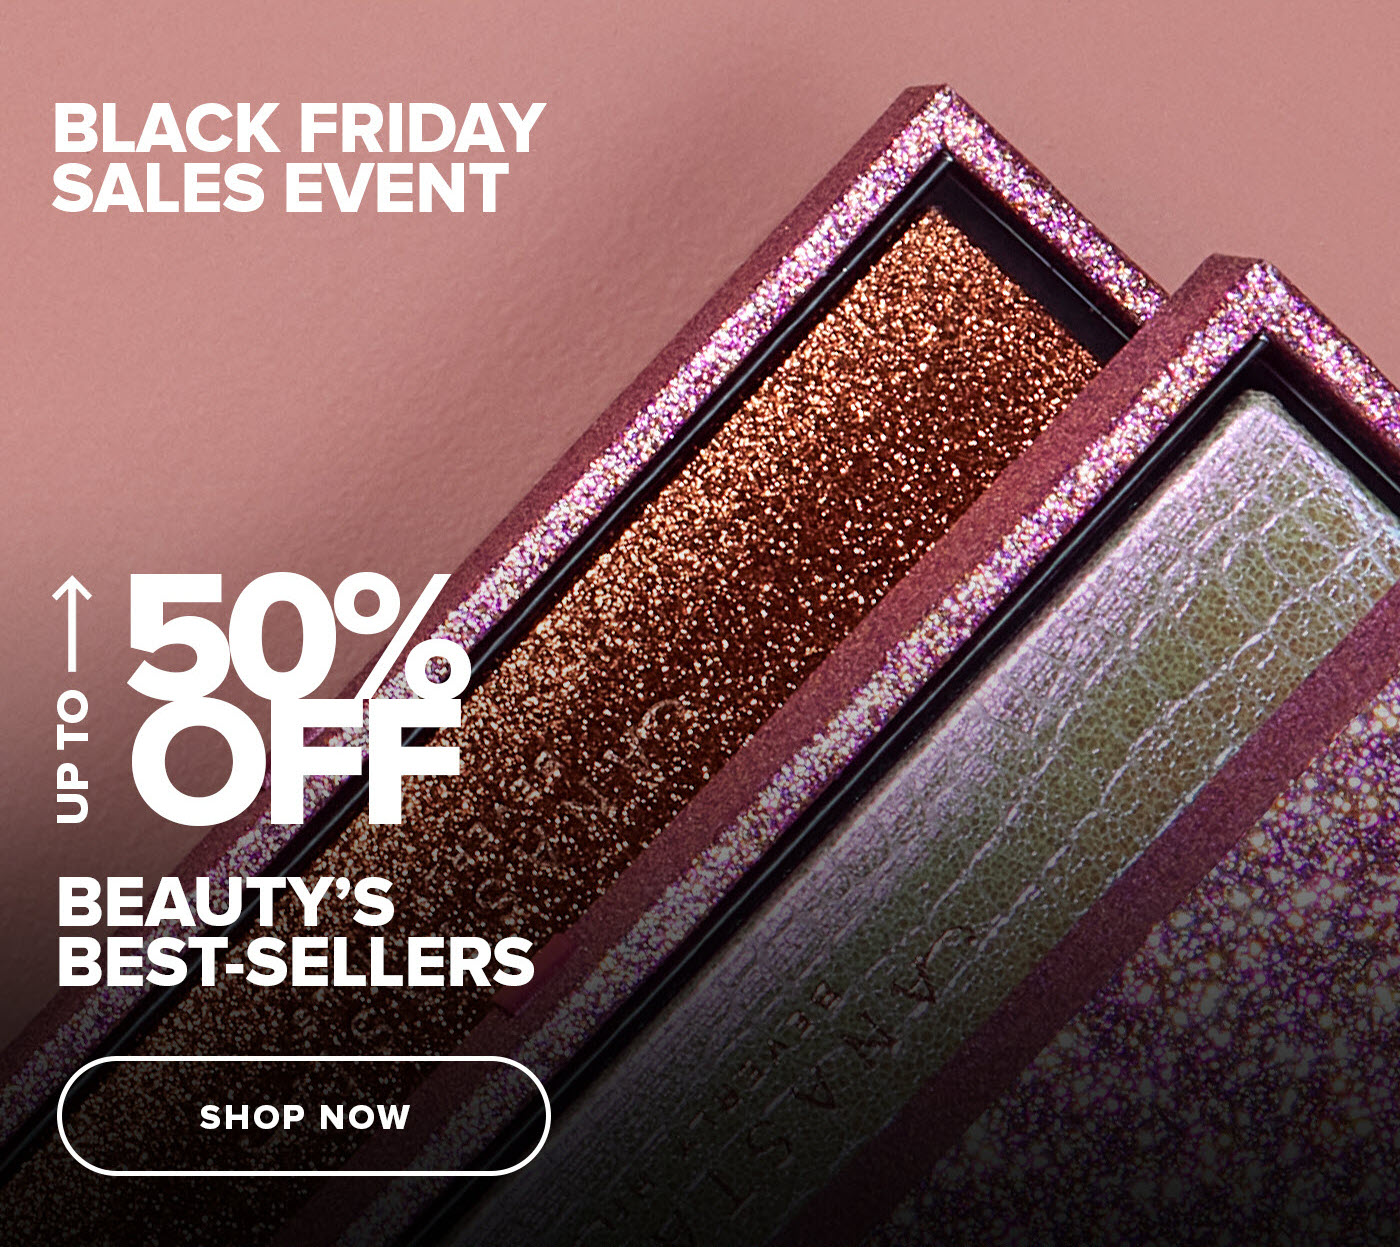 Up to 50% Off Beauty''s Best-Sellers - Shop Now